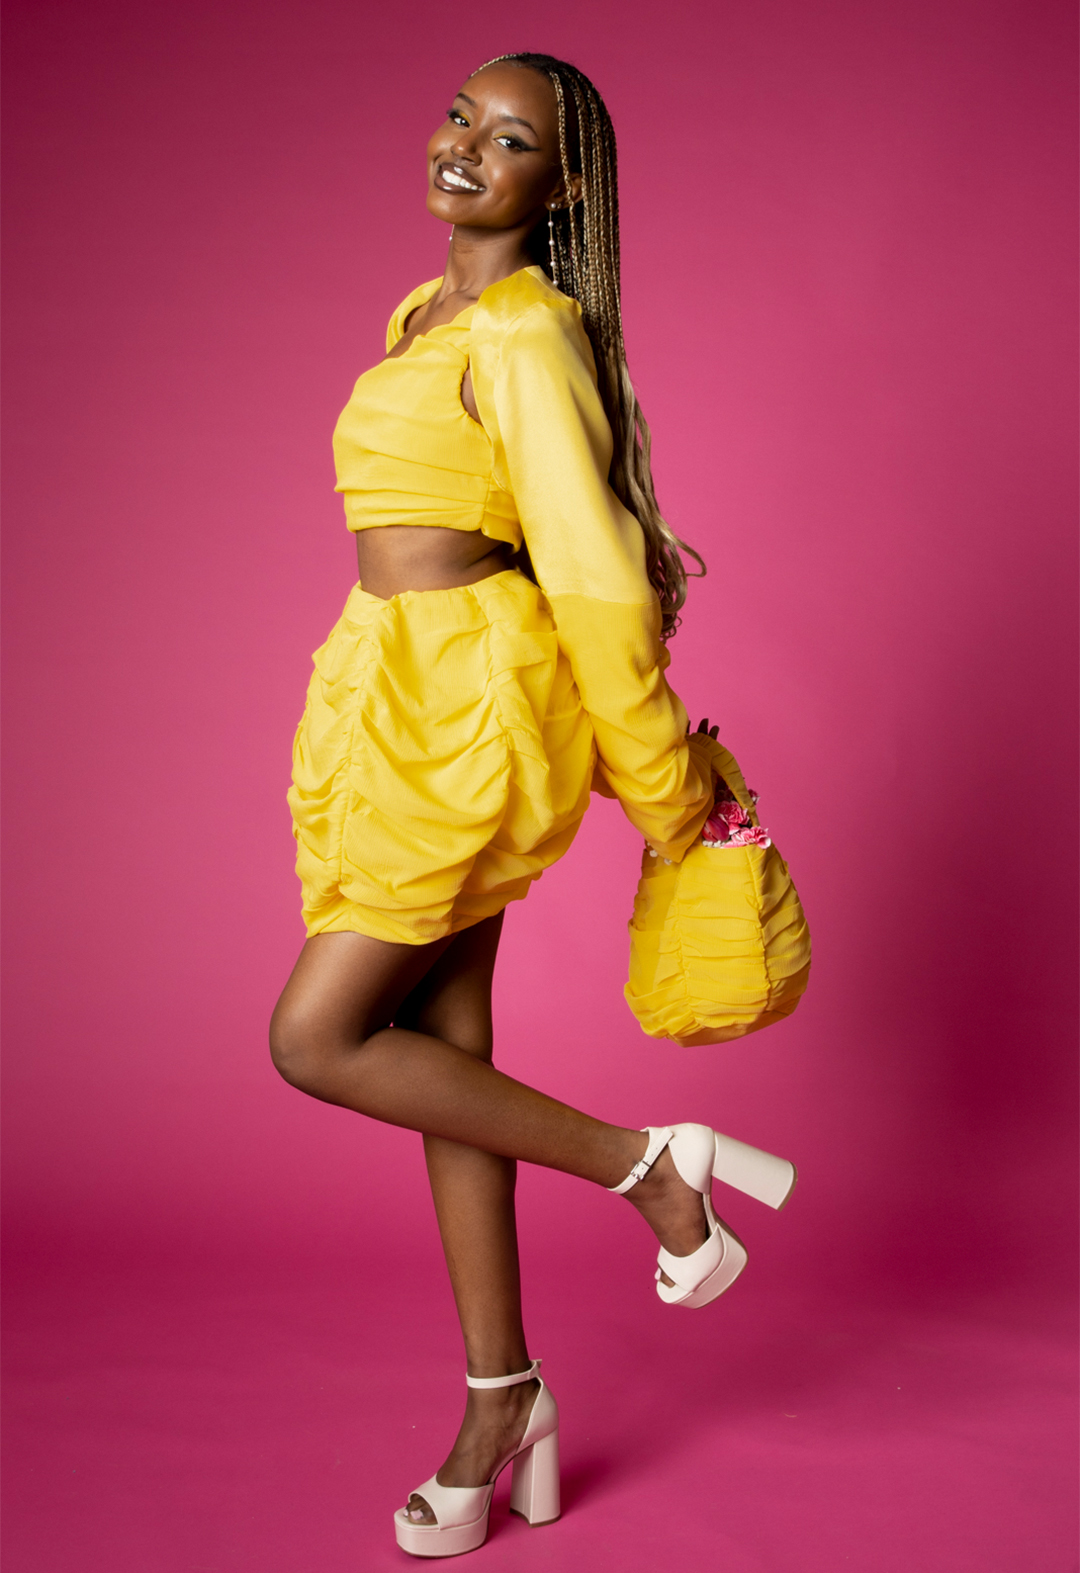 This is a side-view image of a model wearing a yellow silk and crinkle chiffon shrug, a matching one-shoulder ruched top, and a ball skirt.